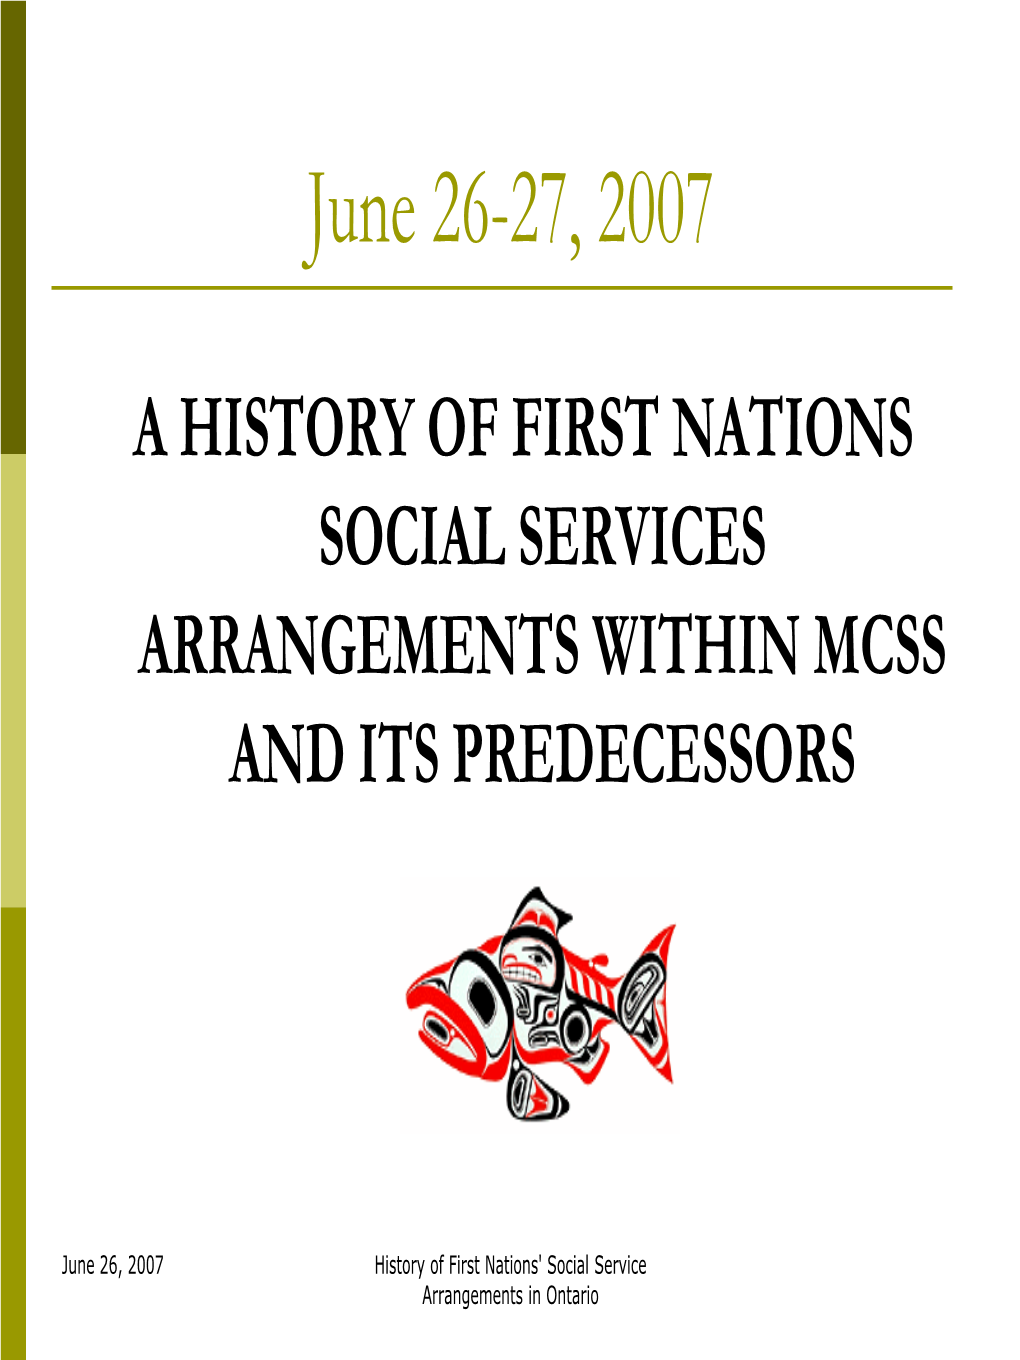 A History of First Nations Social Services Arrangements Within Mcss and Its Predecessors